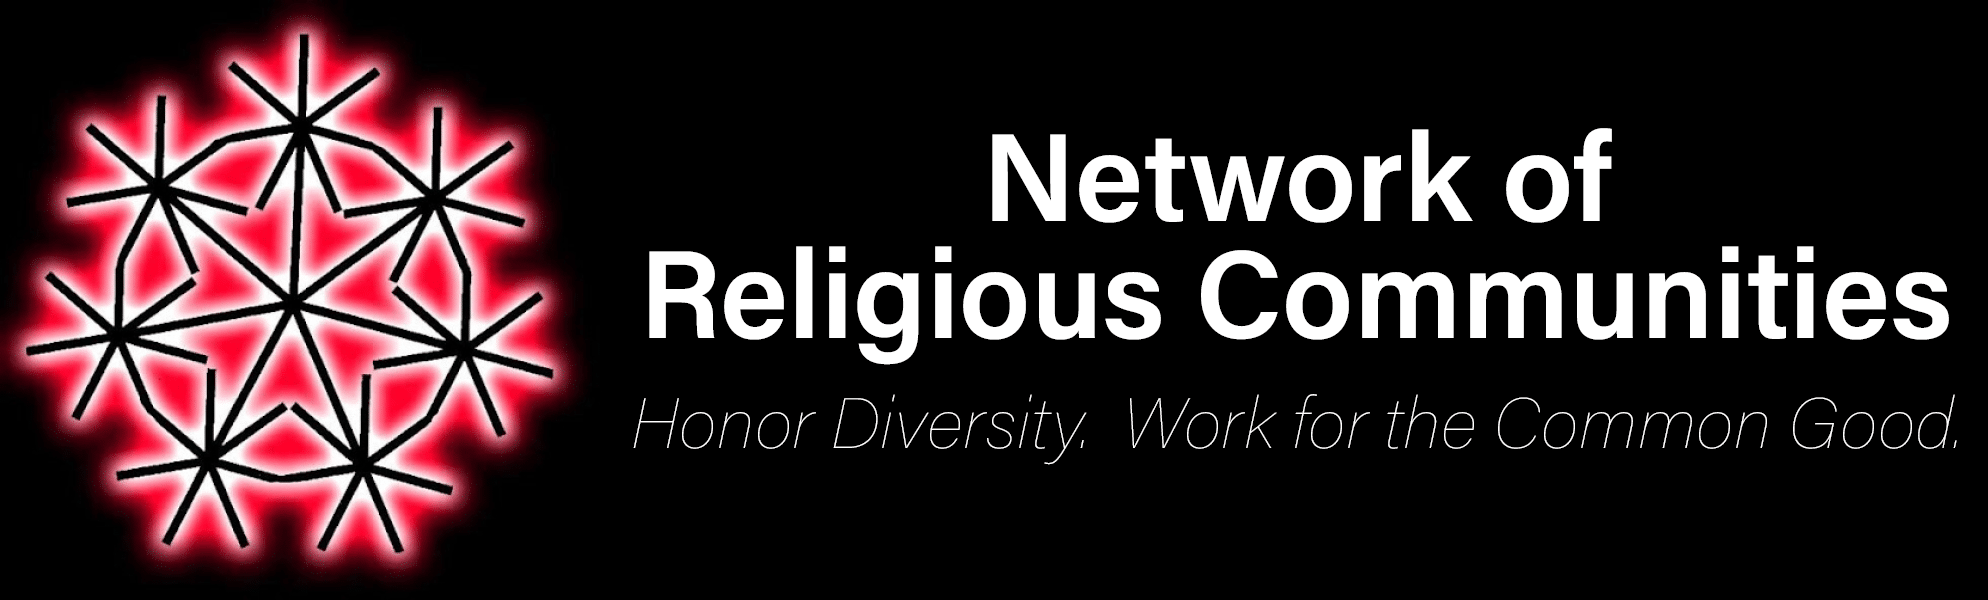 Building Relationships - Network of Religious Communities